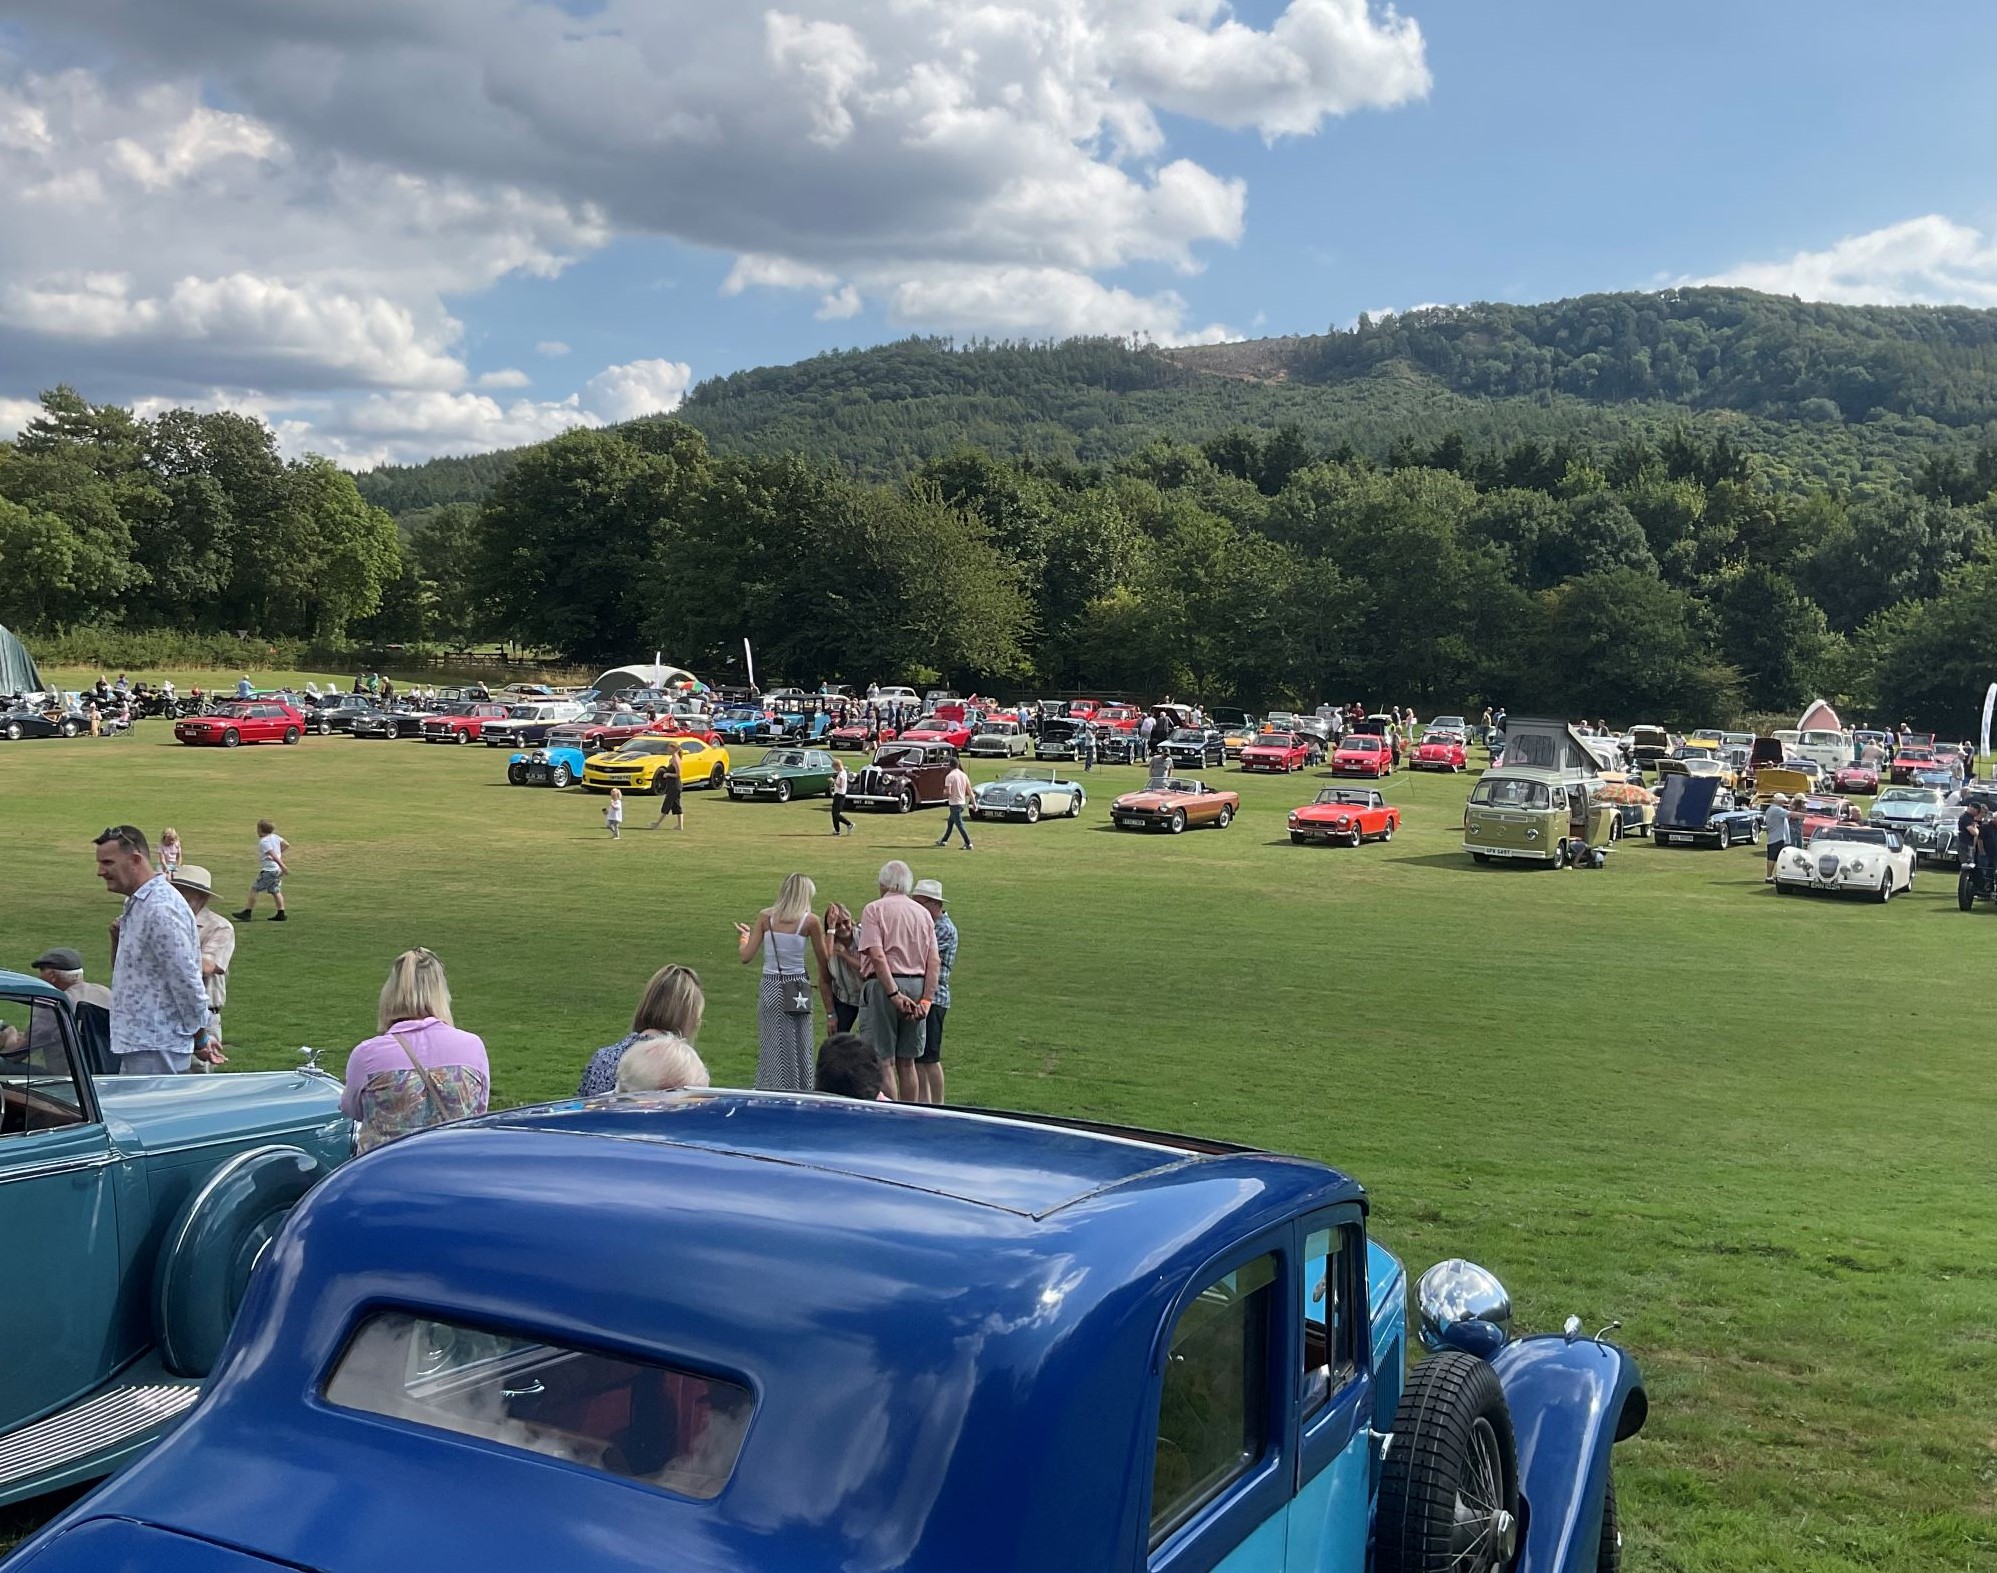 Classic cars on the cricket field